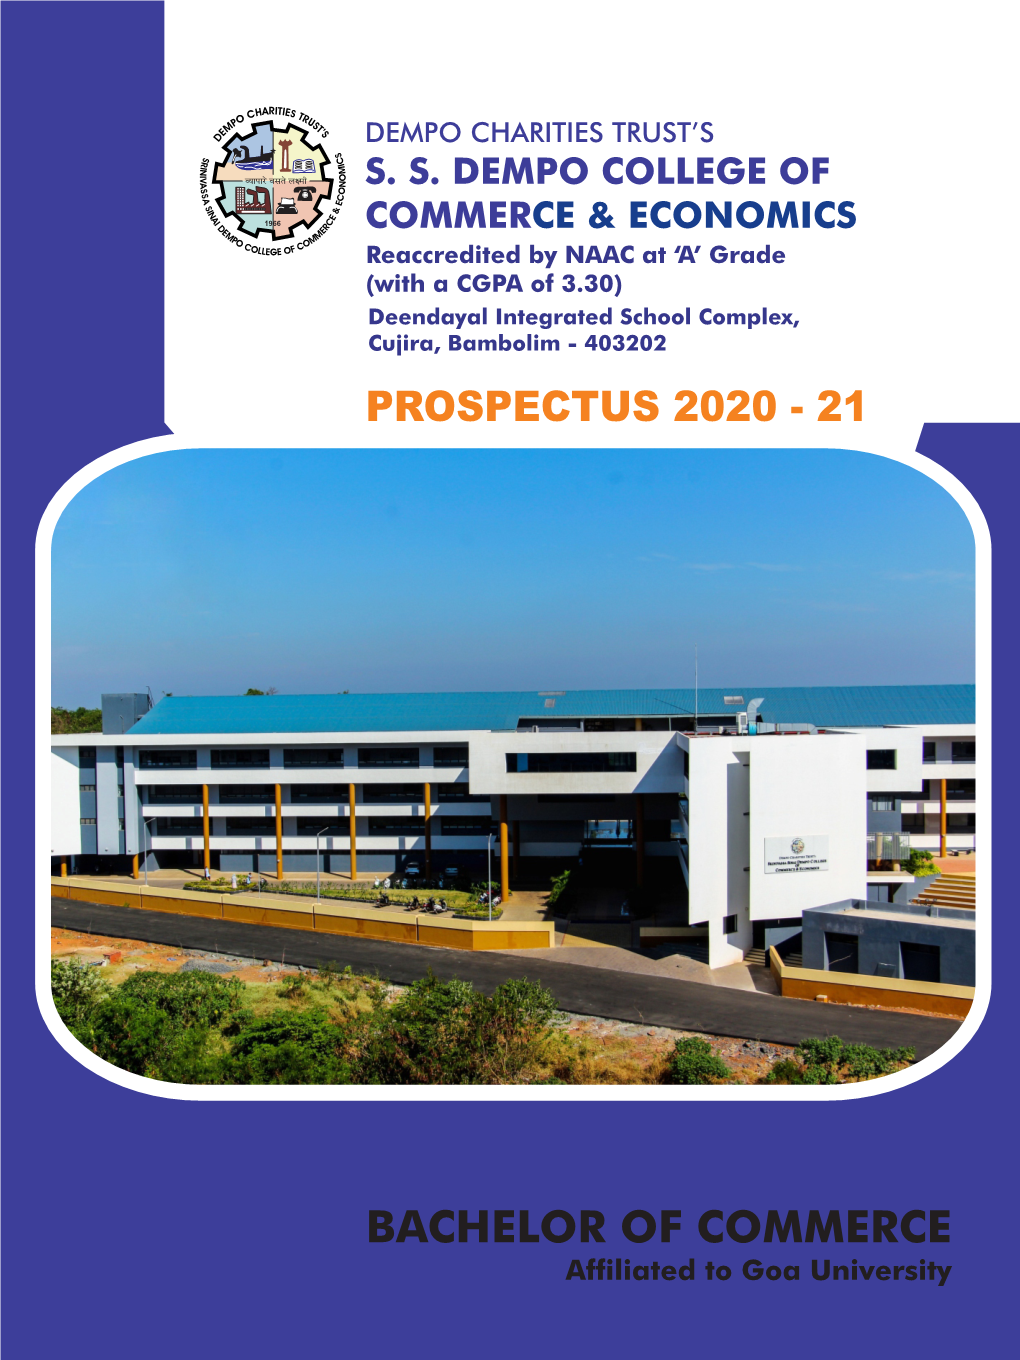 PROSPECTUS 2020 - 21 VISION to Be the Premier Institution for Commerce Education, Transforming Individuals for a Better Society